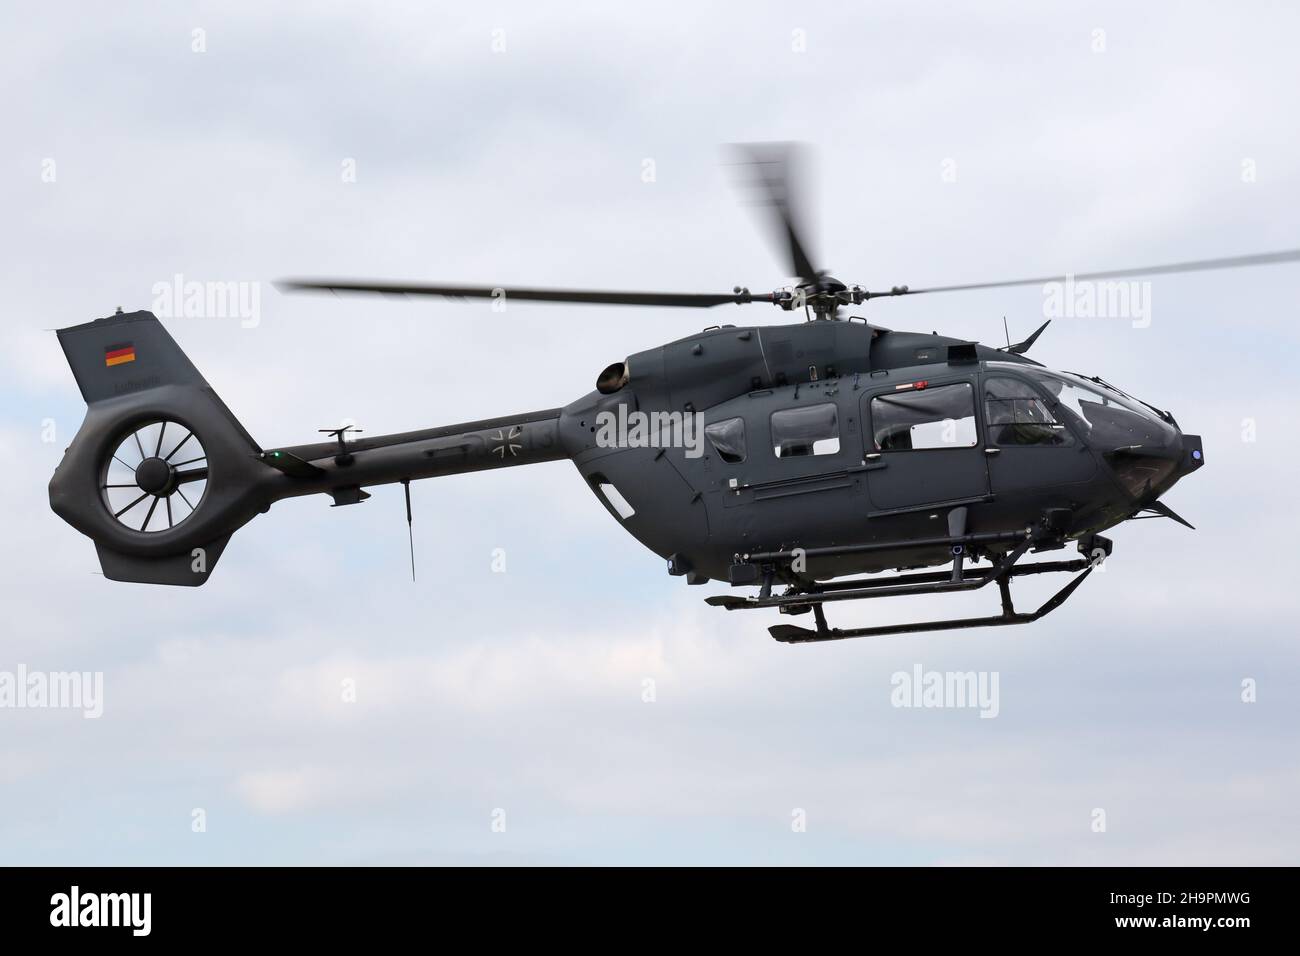 German Airforce Helicopter Stock Photo